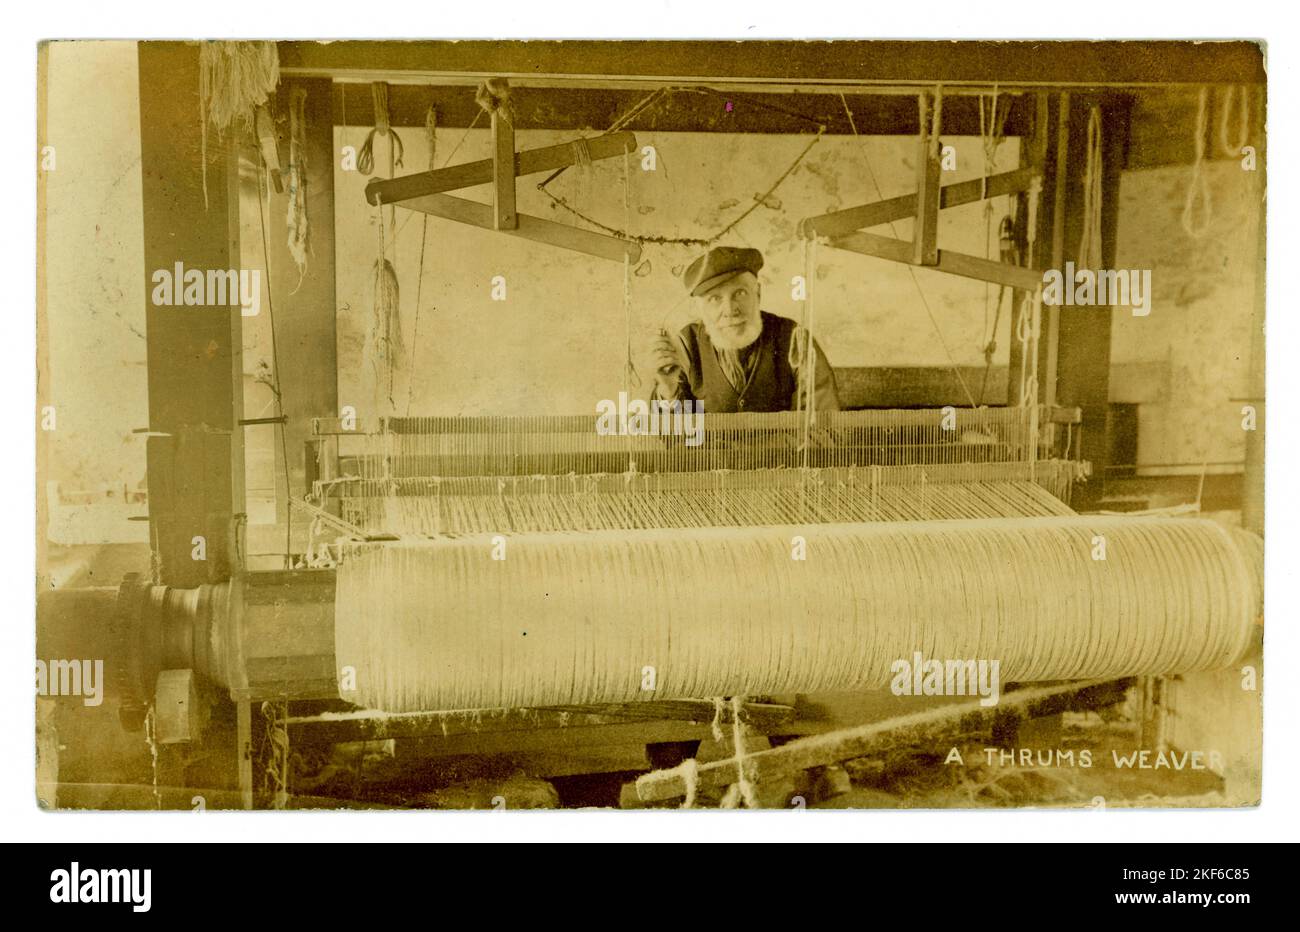 Original Edwardian postcard of an older Scottish man who is a Thrums Weaver -  a cottage worker probably, working from home on a wooden loom, handloom machine,  maybe rugmaking. Thrums are offcuts from carpet weaving industry, they were cheap so this man is likely to be poor. Postcard is dated /  posted on 5 Feb 1907 from Kirriemuir, Angus, Scotland, Stock Photo